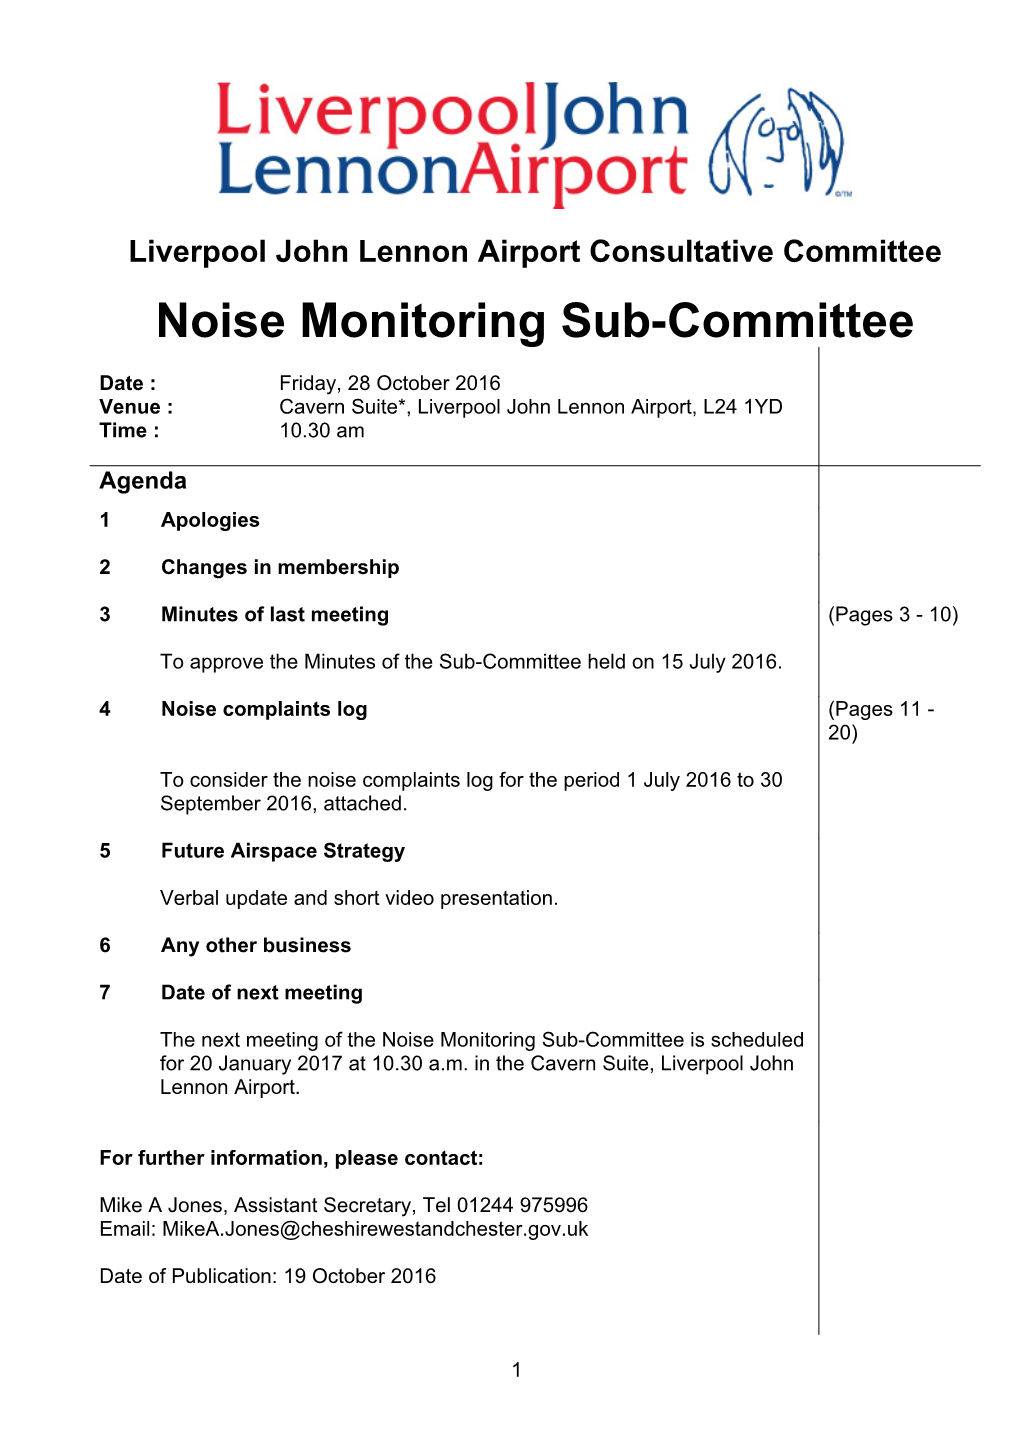 Agenda Document for Noise Monitoring Sub-Committee, 28/10